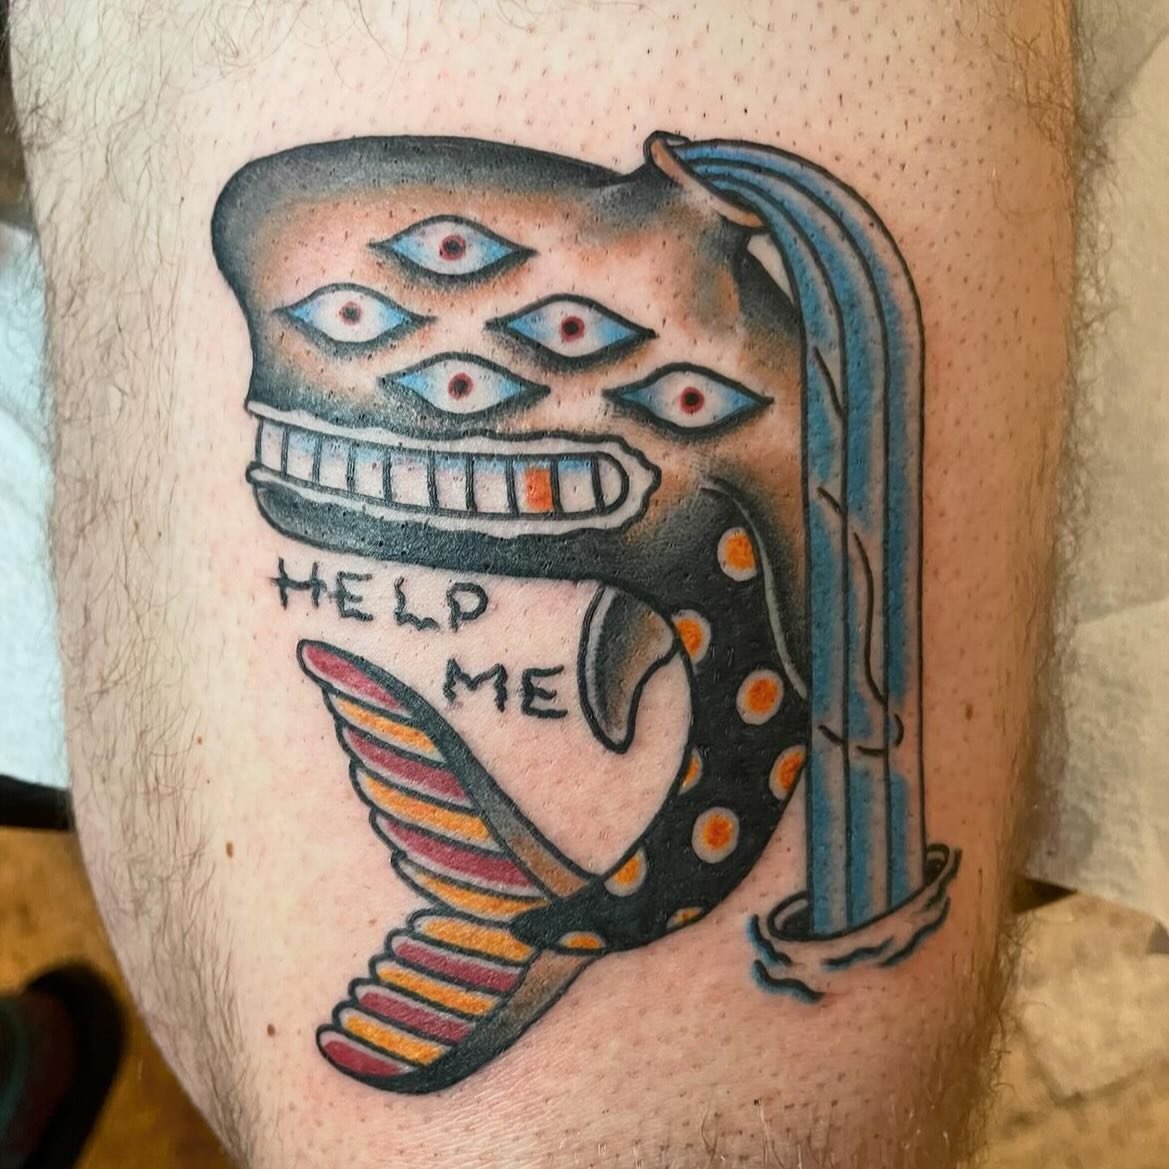 @jakeacreetattoos had a whale of a time doing this one for a Ween fan! He&rsquo;s booking for May, hit him up with your ideas! 🐳